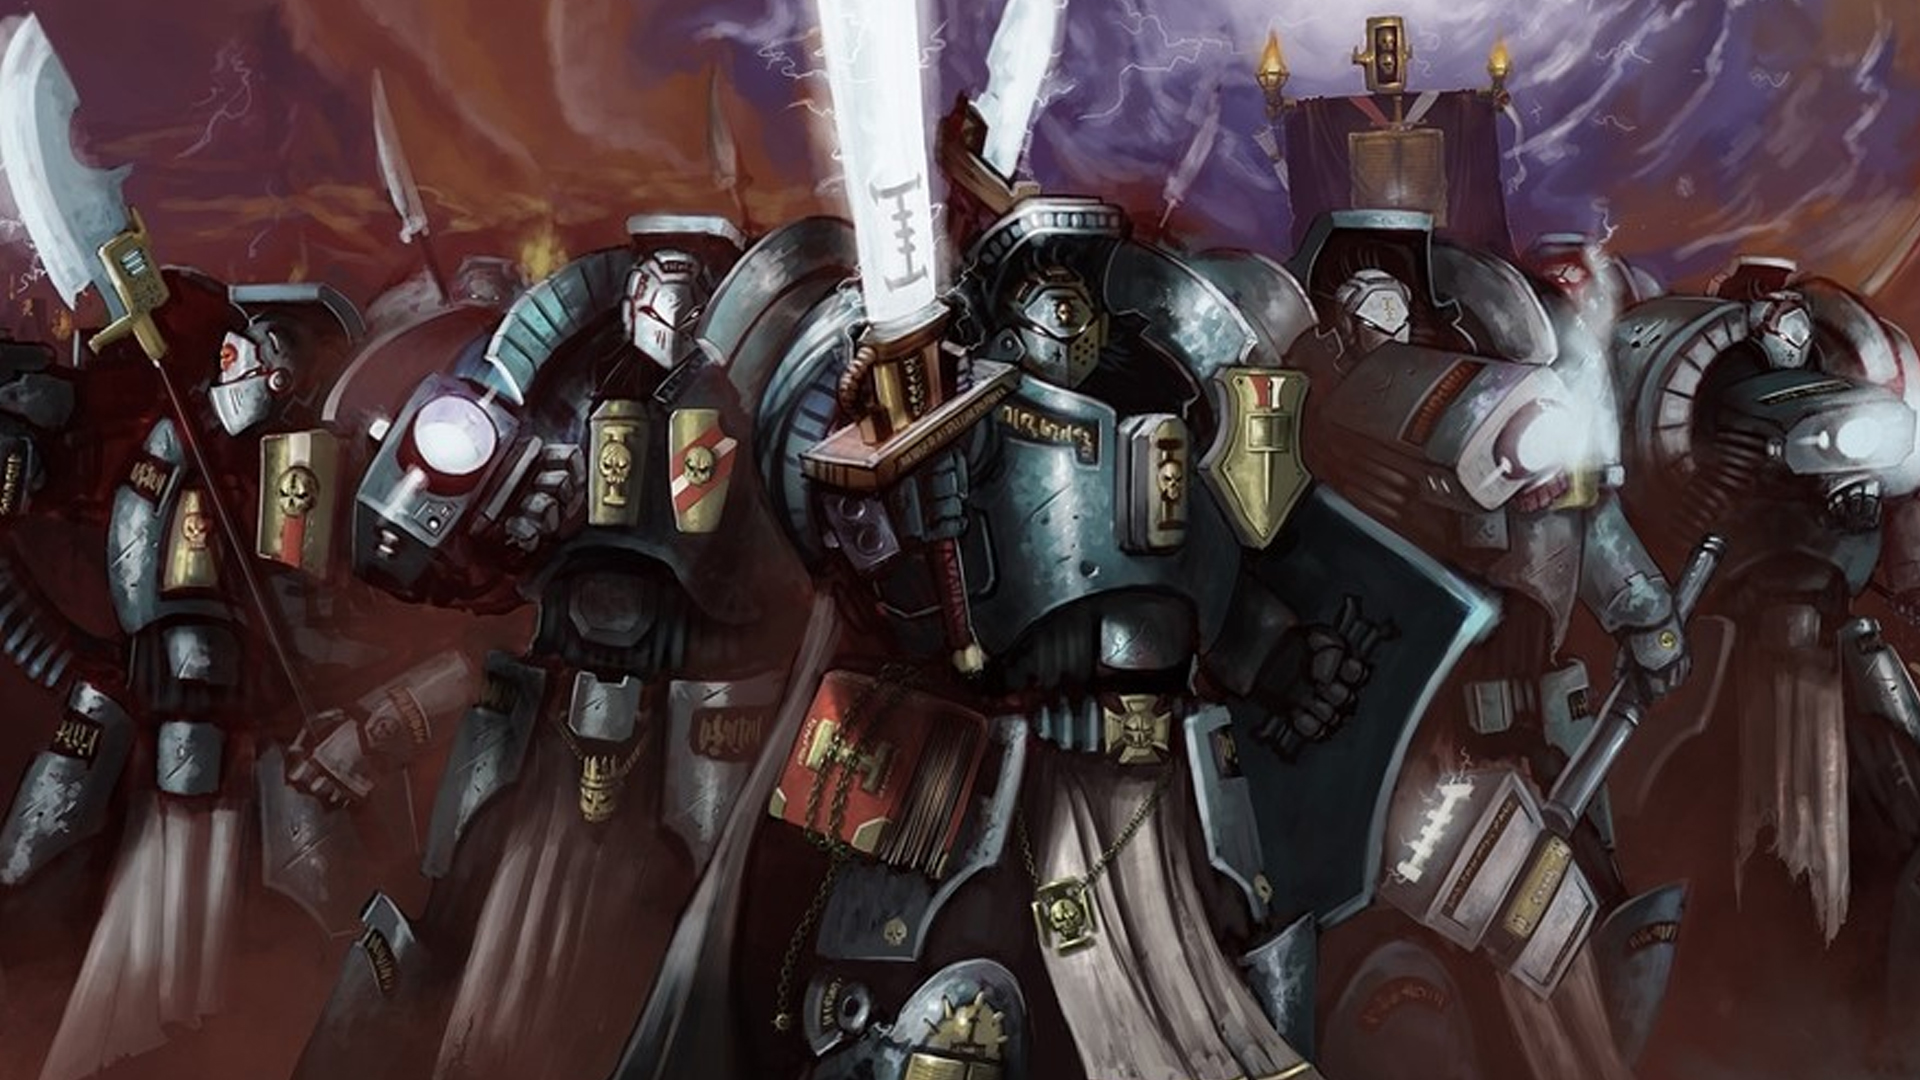 Warhammer 40k Malcador the Sigillite guide - Games Workshop artwork showing the Grey Knights, specialist psyker Space Marines conceived of and set up by Malcador the Sigillite